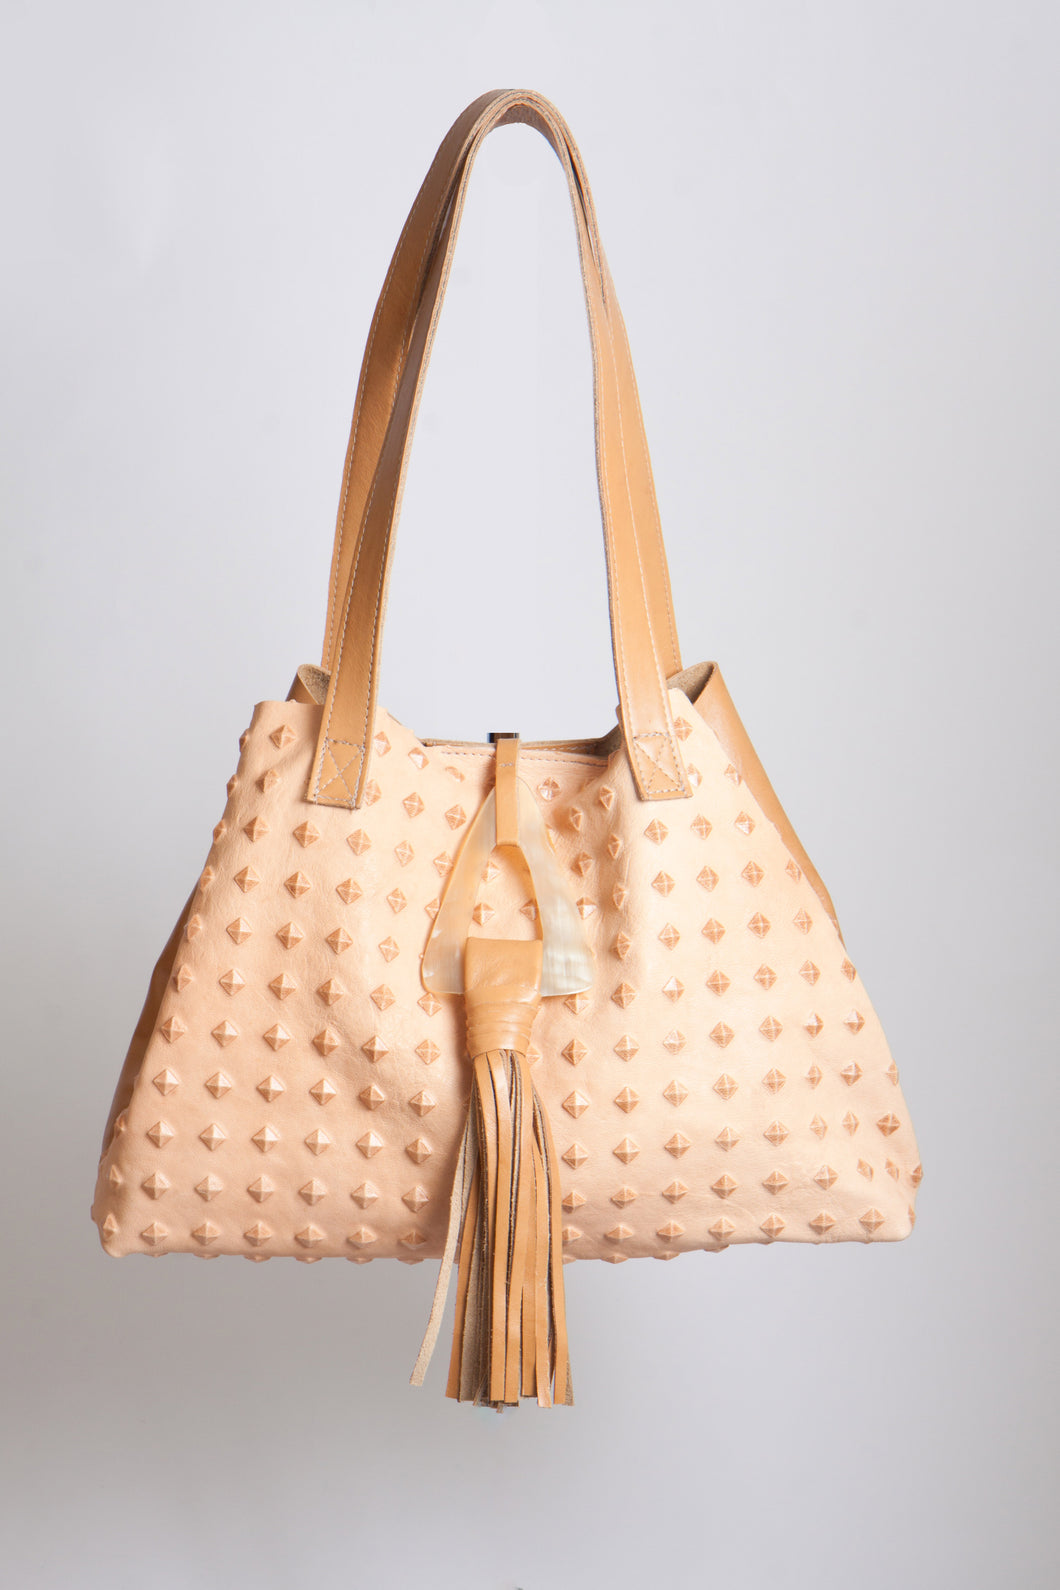 <b>Stacie</b><br> <p><font size=“3px”> Camel Pyramid Tote With Horn Tassel</font></p>